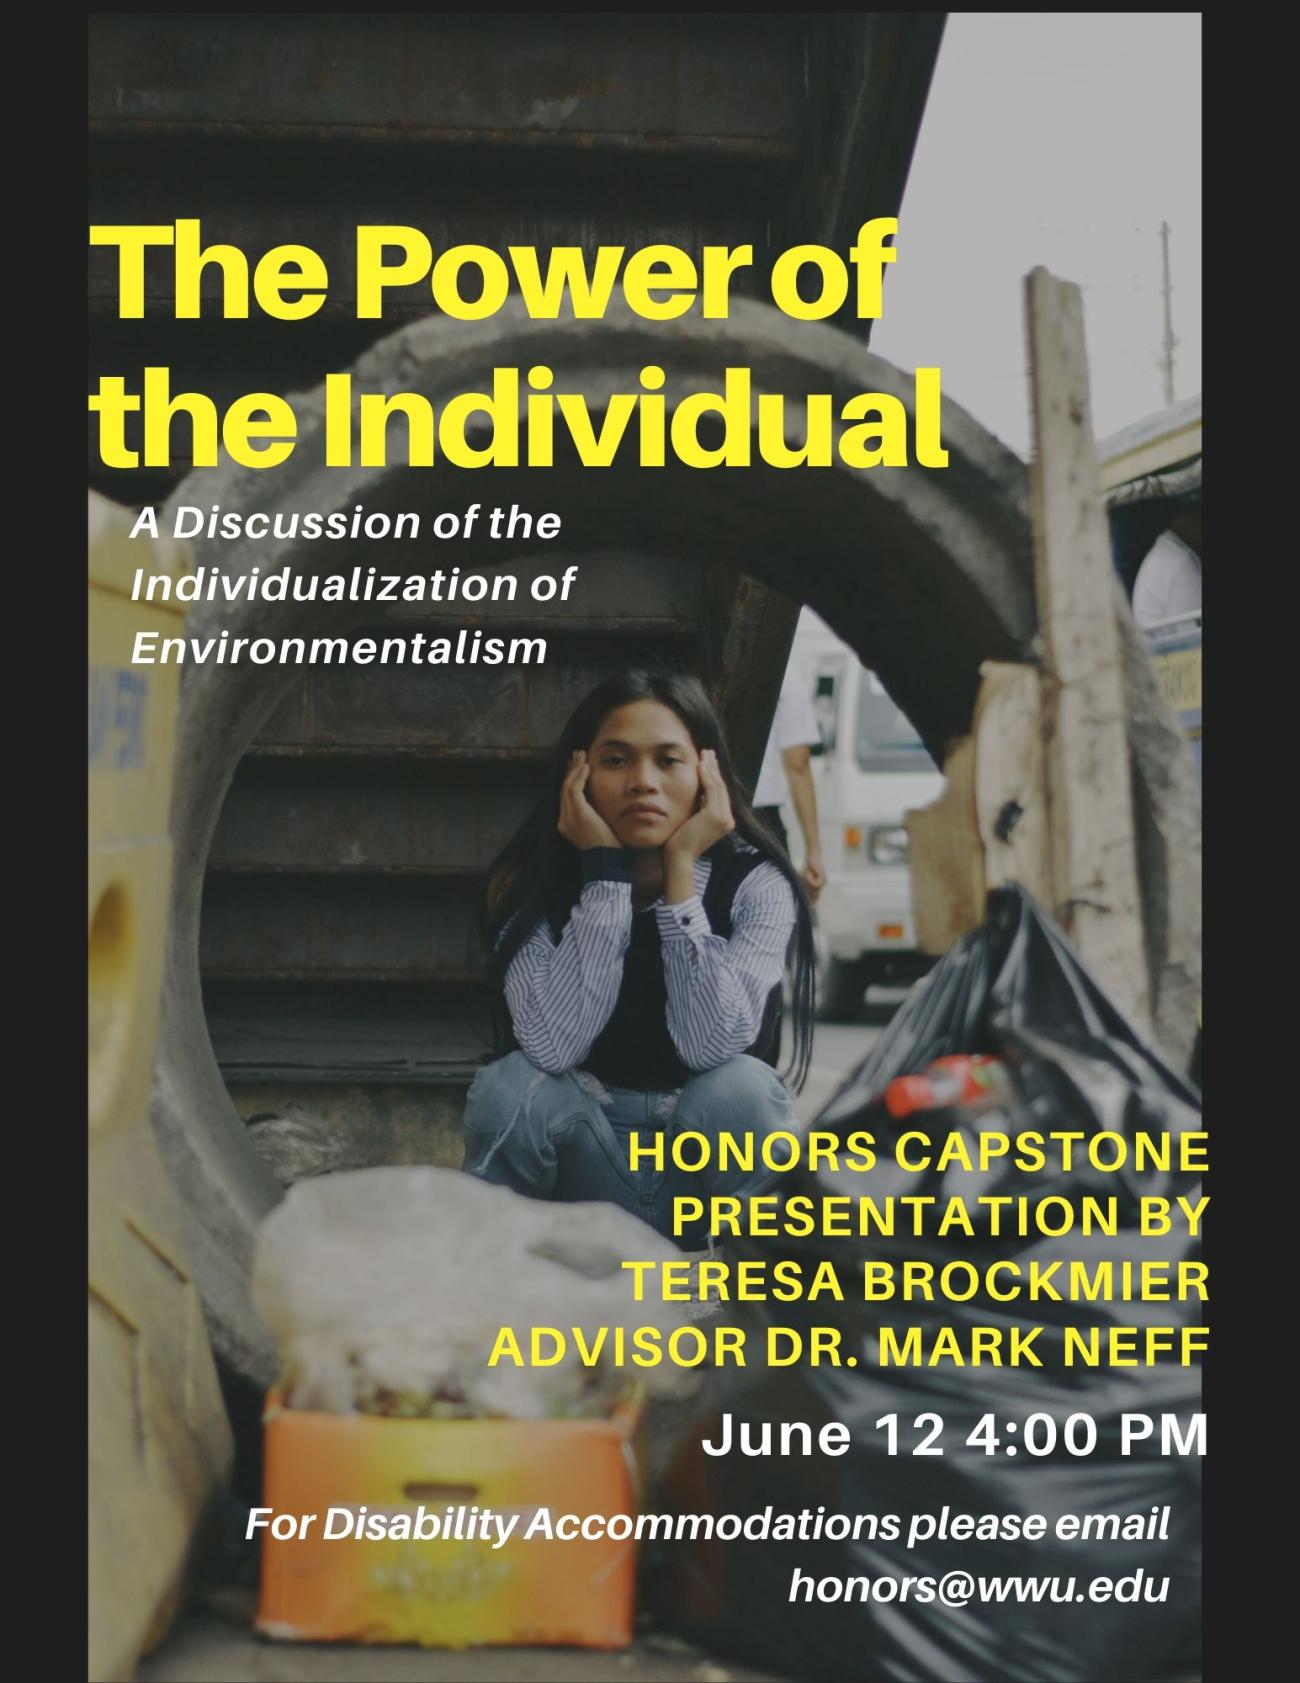 Image: A person sits, head in their hands, surrounded by garbage and rubble with a forlorn look on their face. Text: "The Power of the Individual: A Discussion on the Individualization of Environmentalism. Honors Capstone Presentation by Teresa Brockmier, Advisor Dr. Mark Neff. June 12th 4 PM. For Disability Accommodations please email honors@wwu.edu."